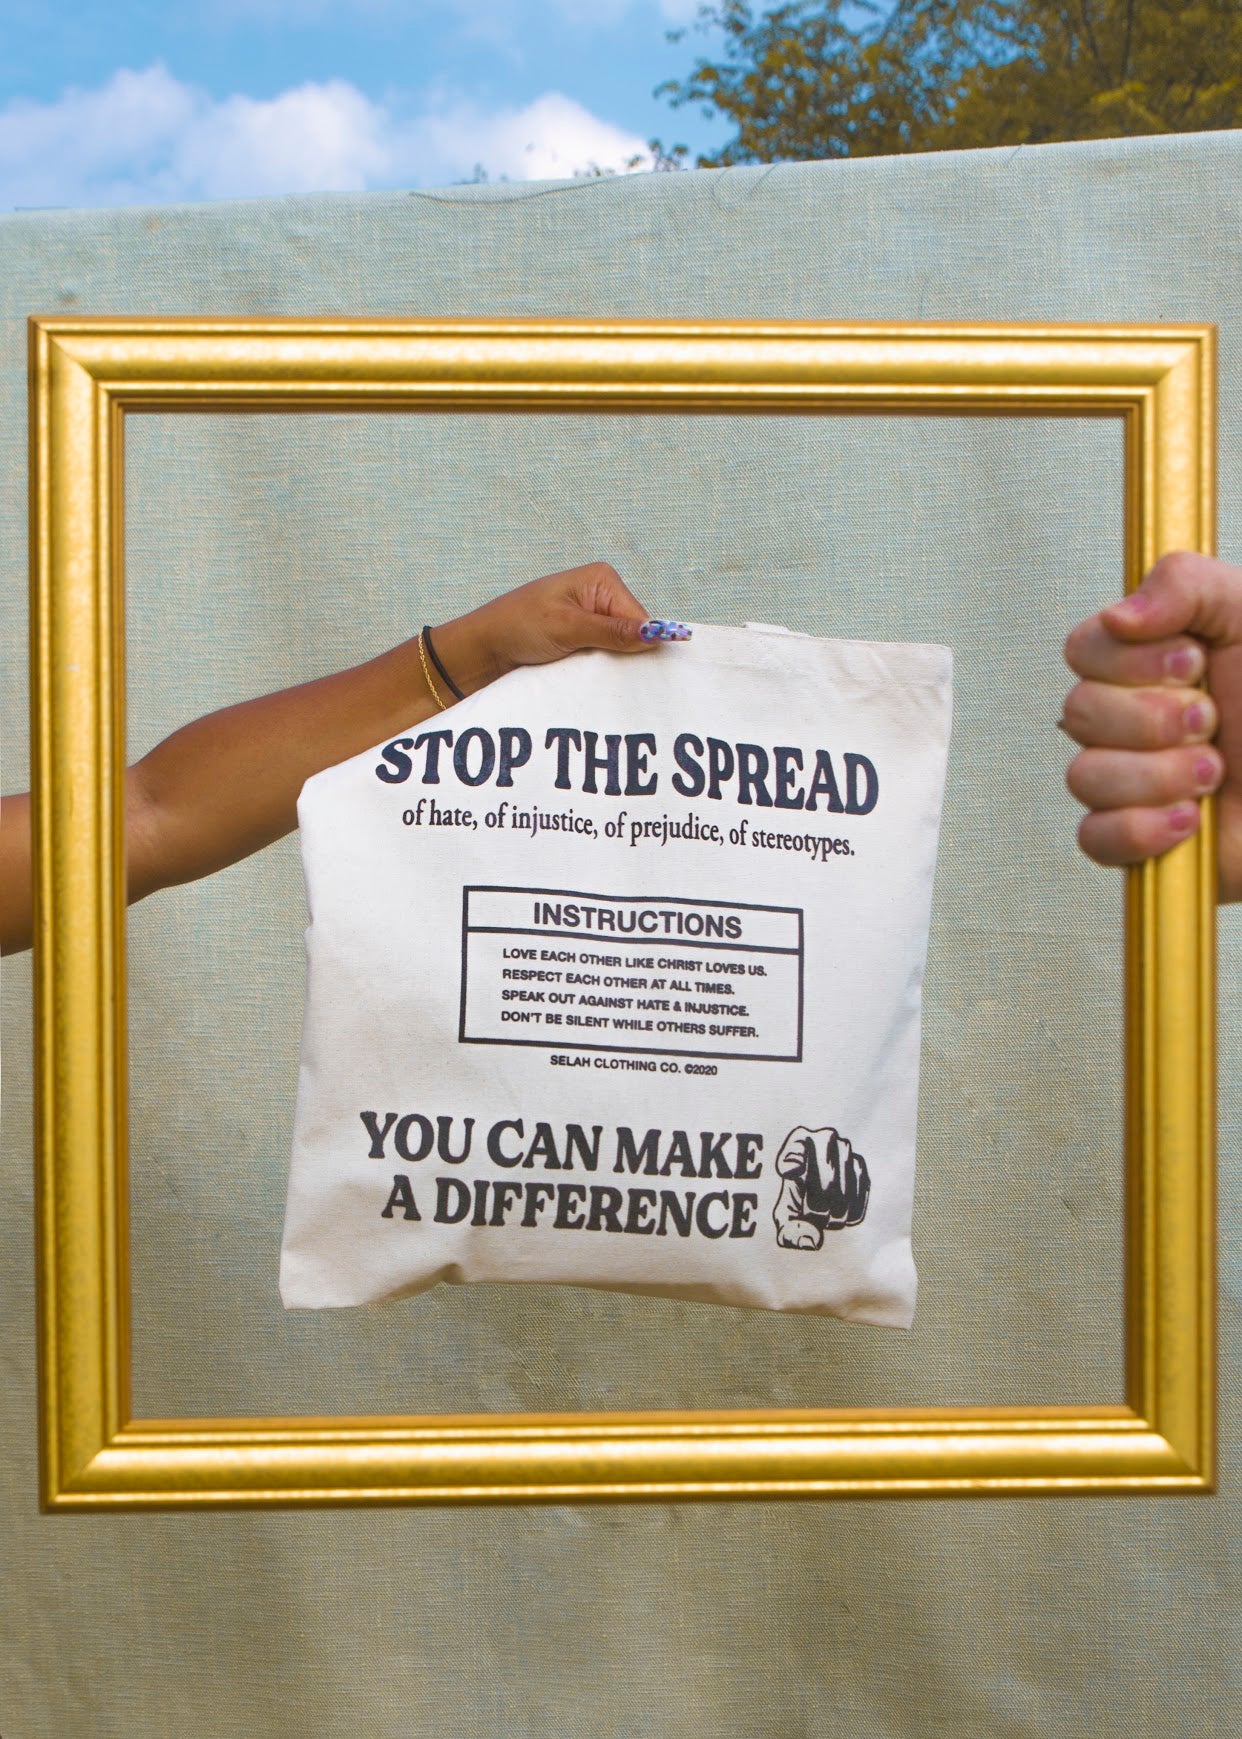 STOP THE SPREAD TOTE BAG